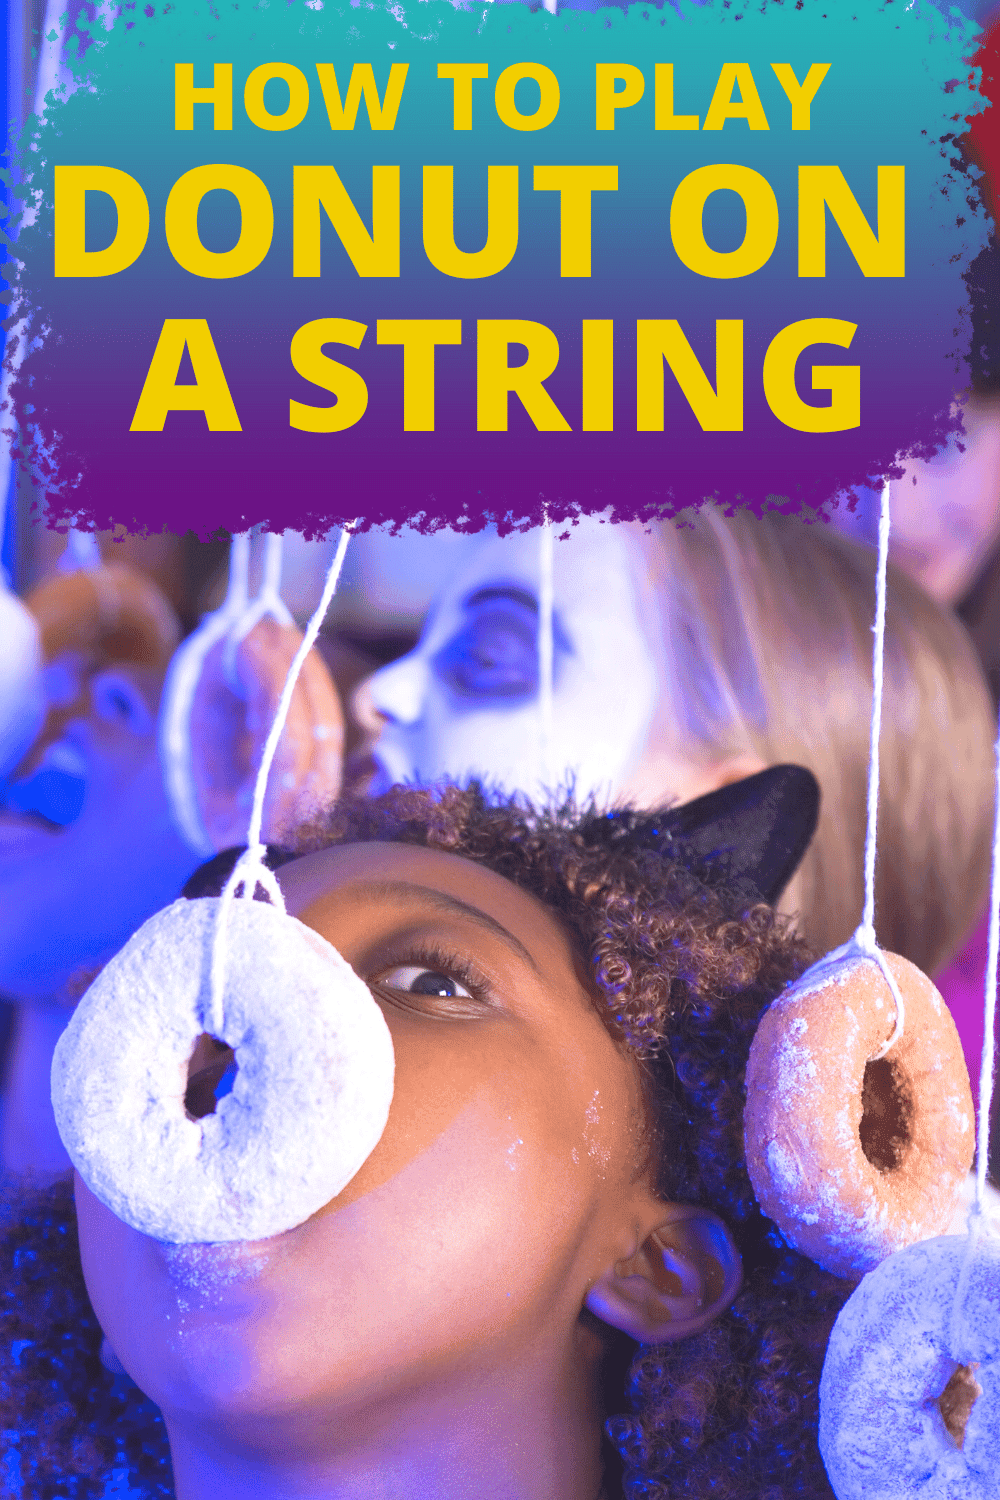 How To Play Donut On A String Game Eat The Donut Challenge text over young girl with Halloween cat ears eating powder sugar donut